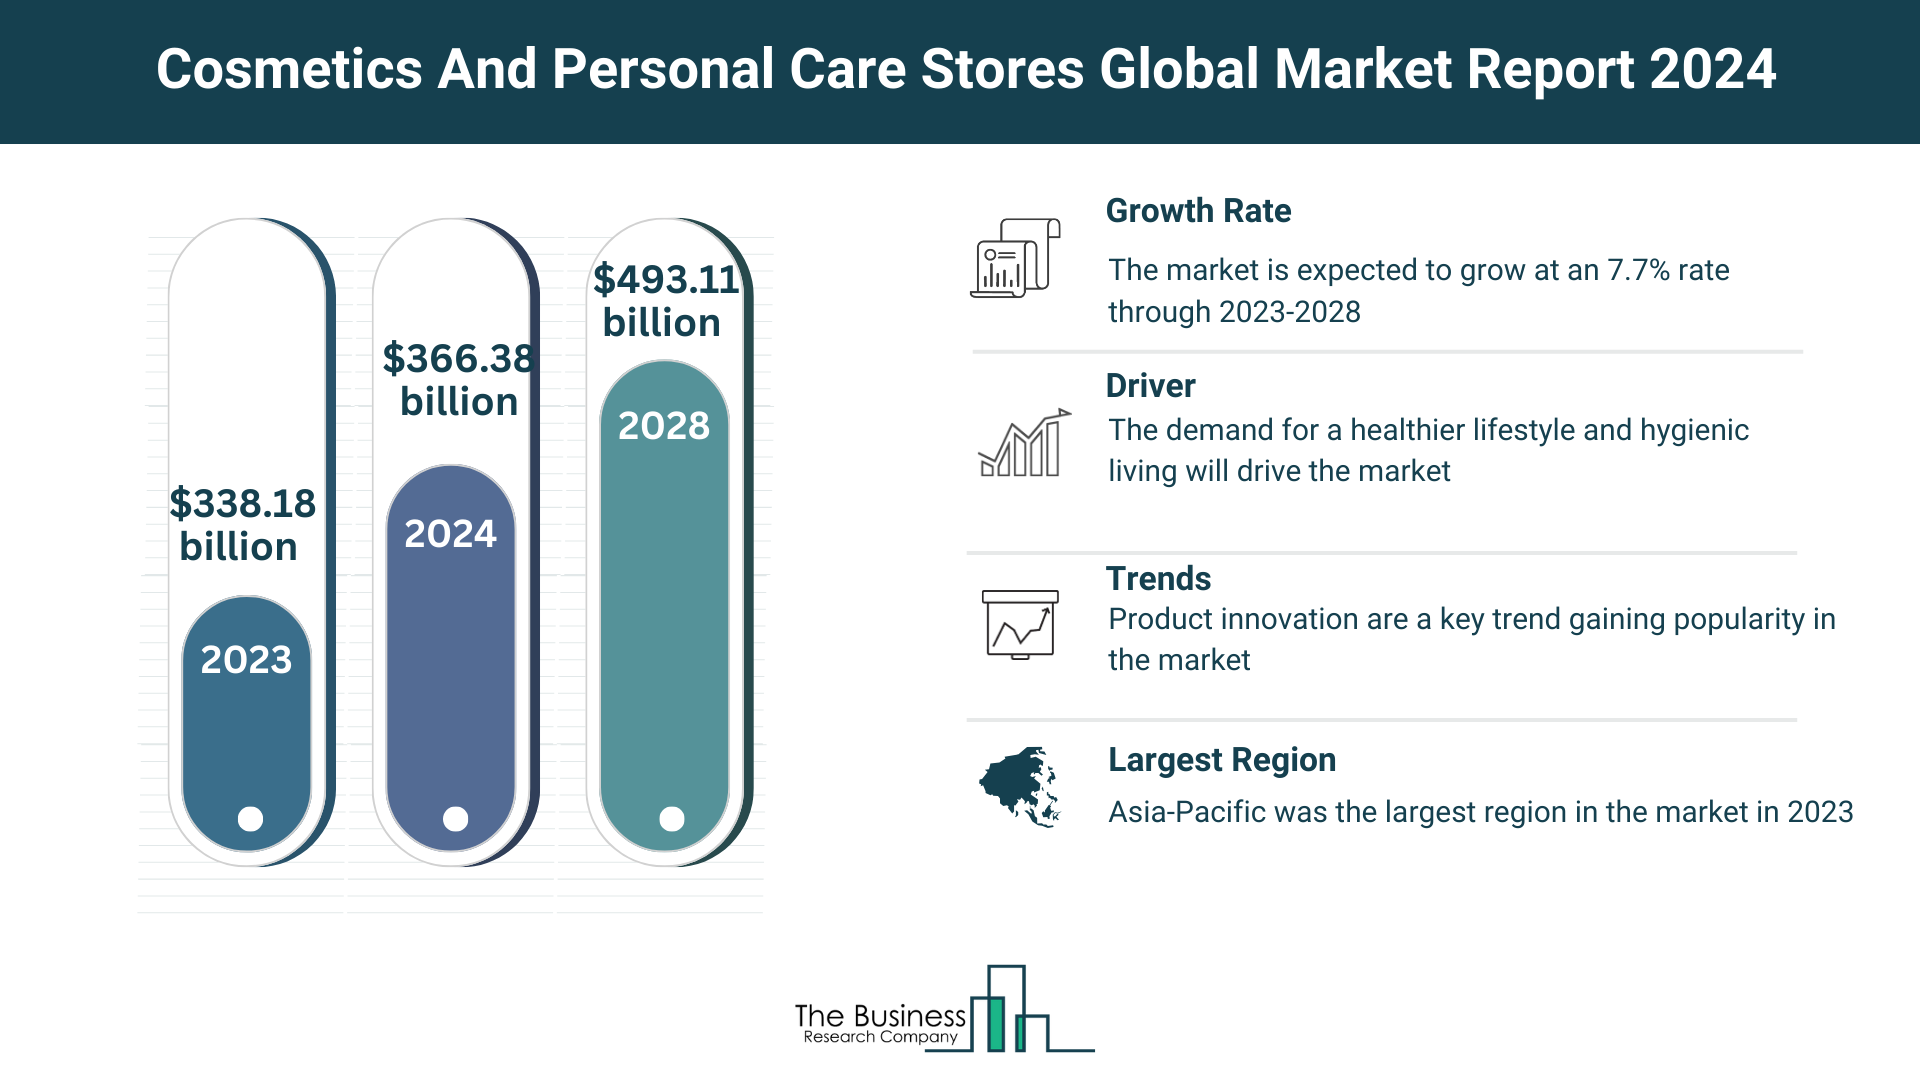 5 Major Insights On The Cosmetics And Personal Care Stores Market 2024